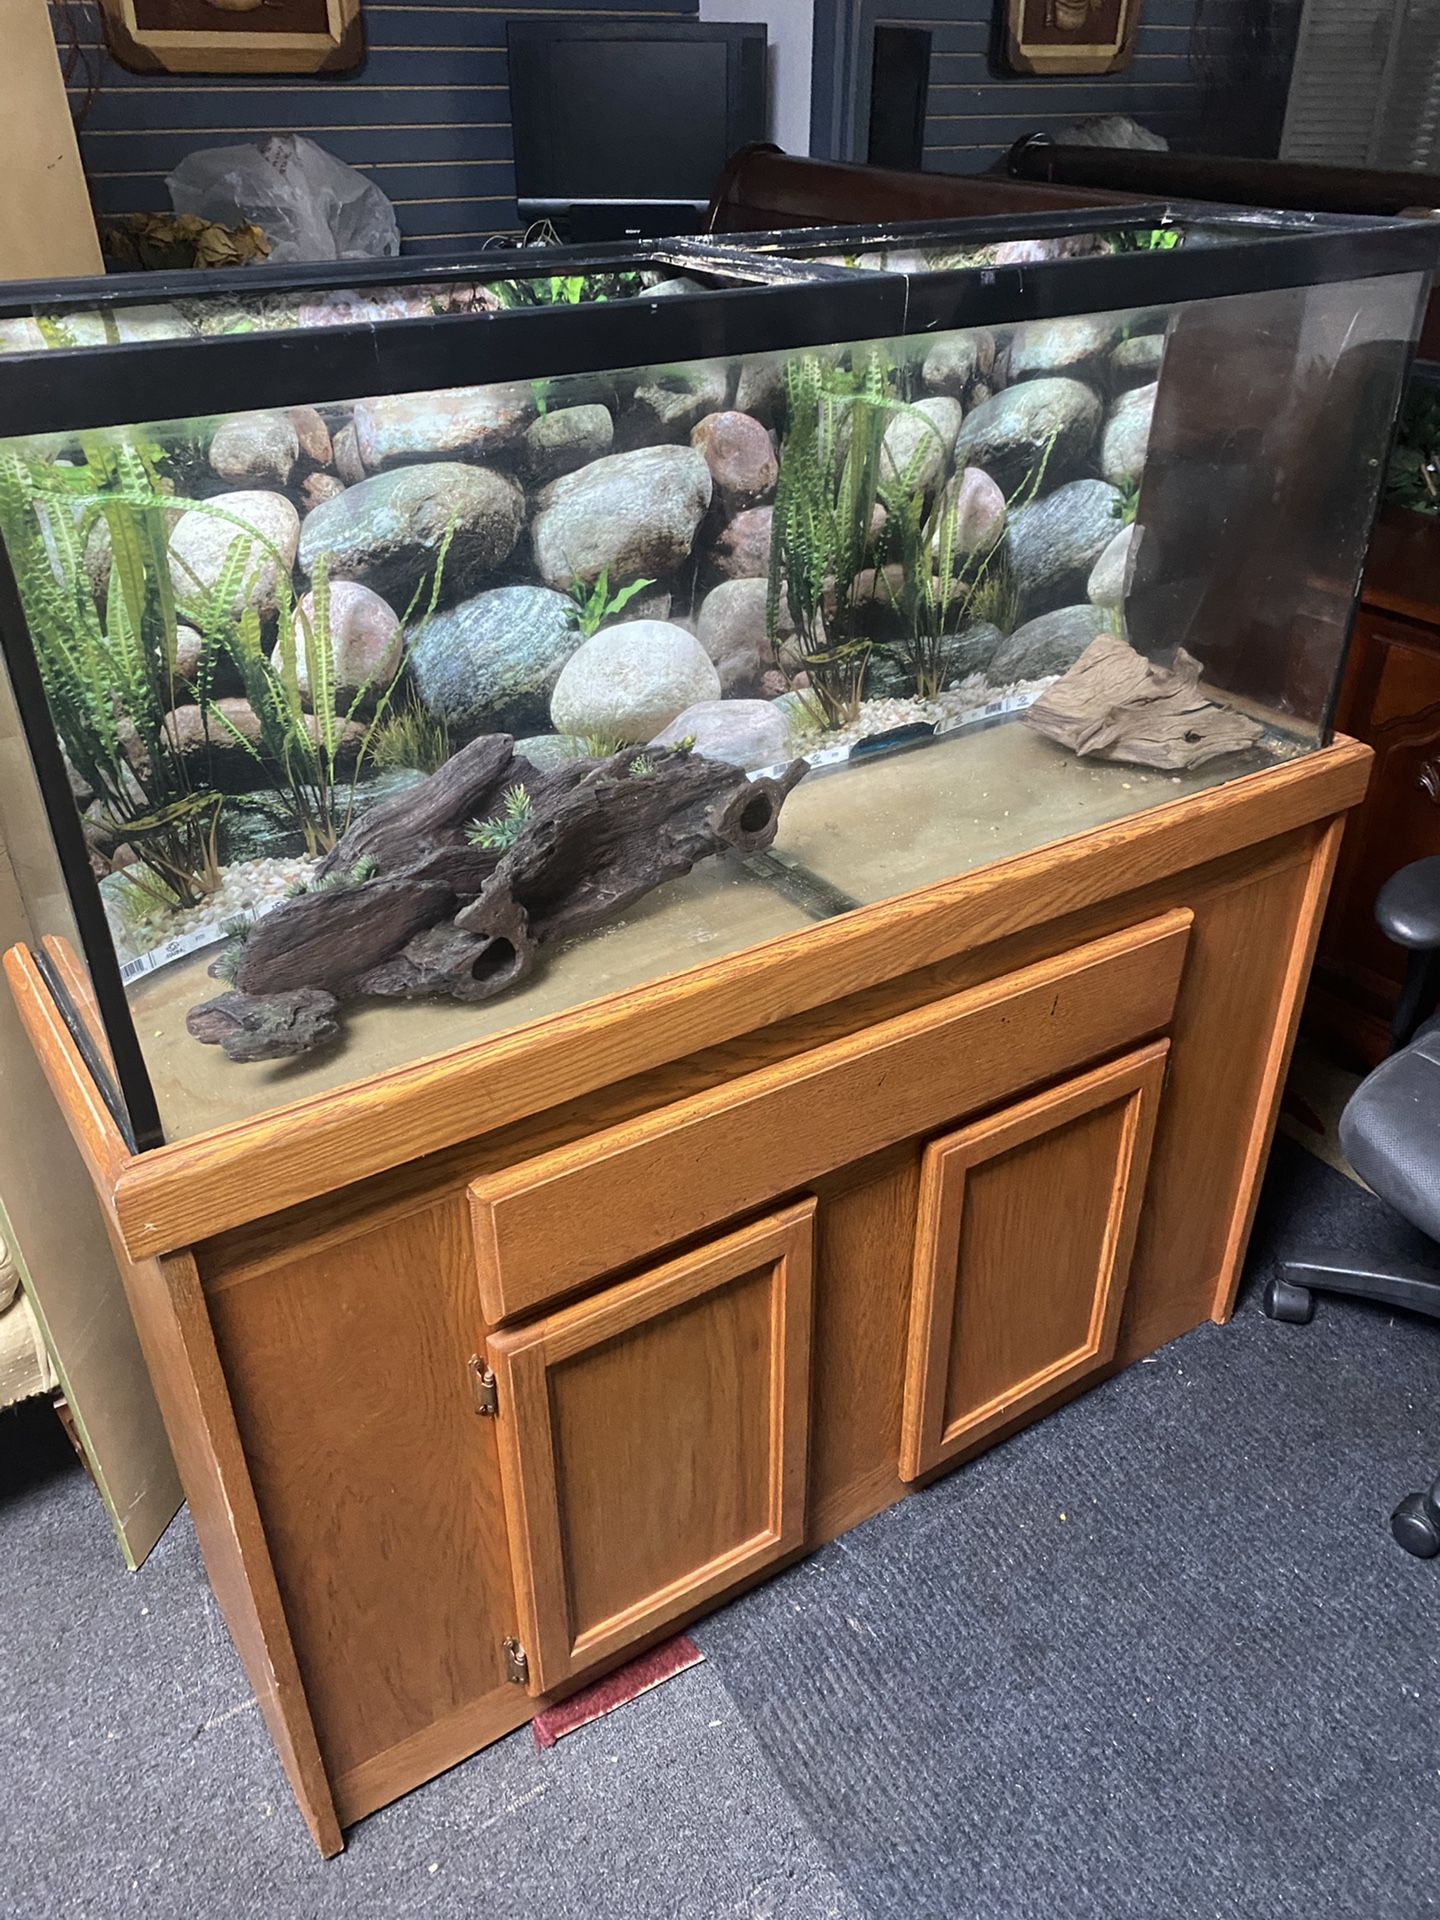 55 galons fish tank whit stand for reptiles 🐊 